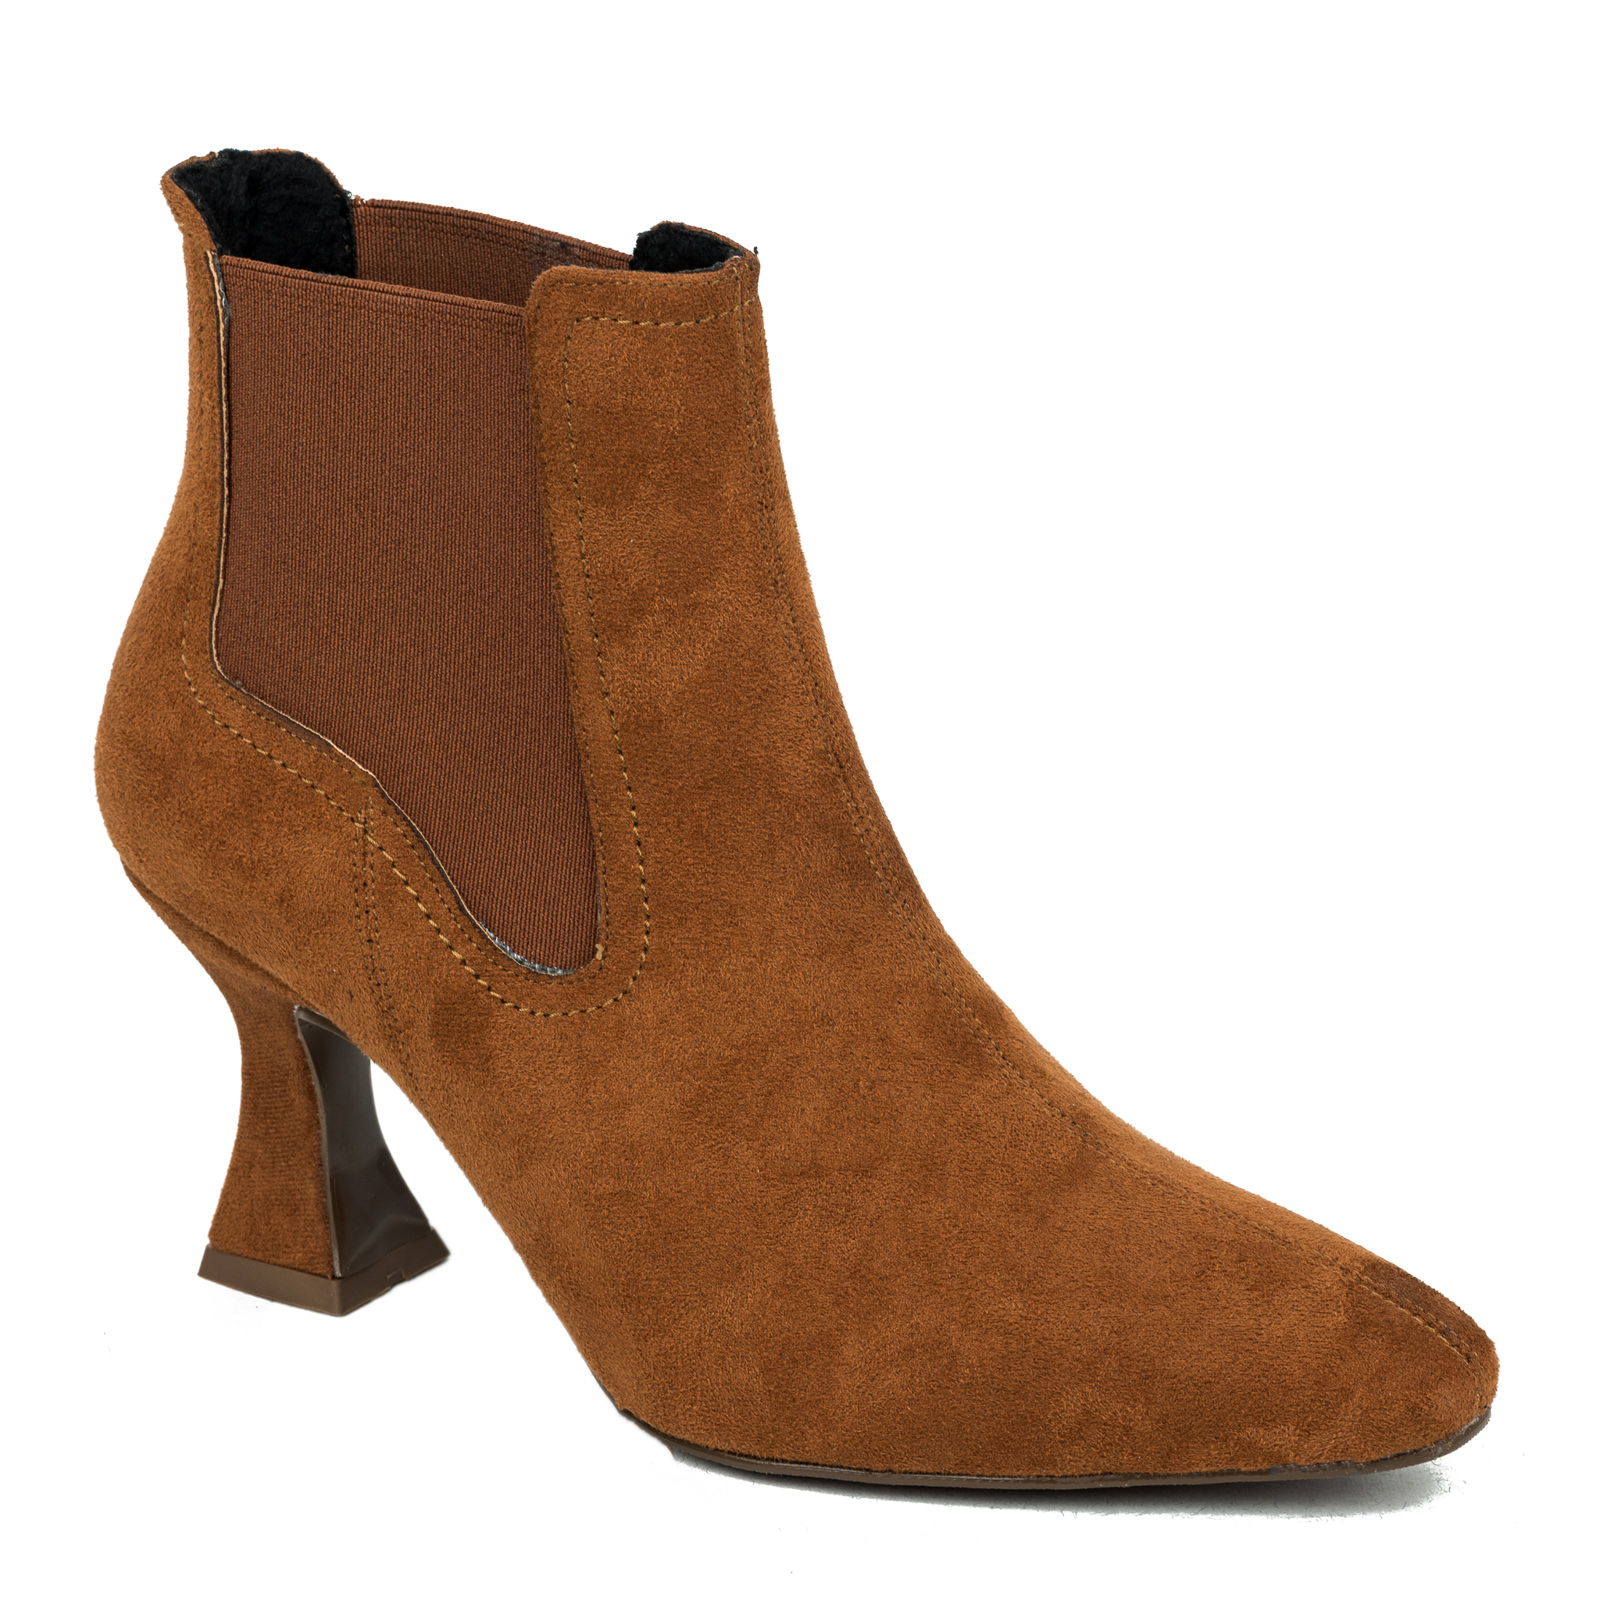 Women ankle boots B170 - CAMEL